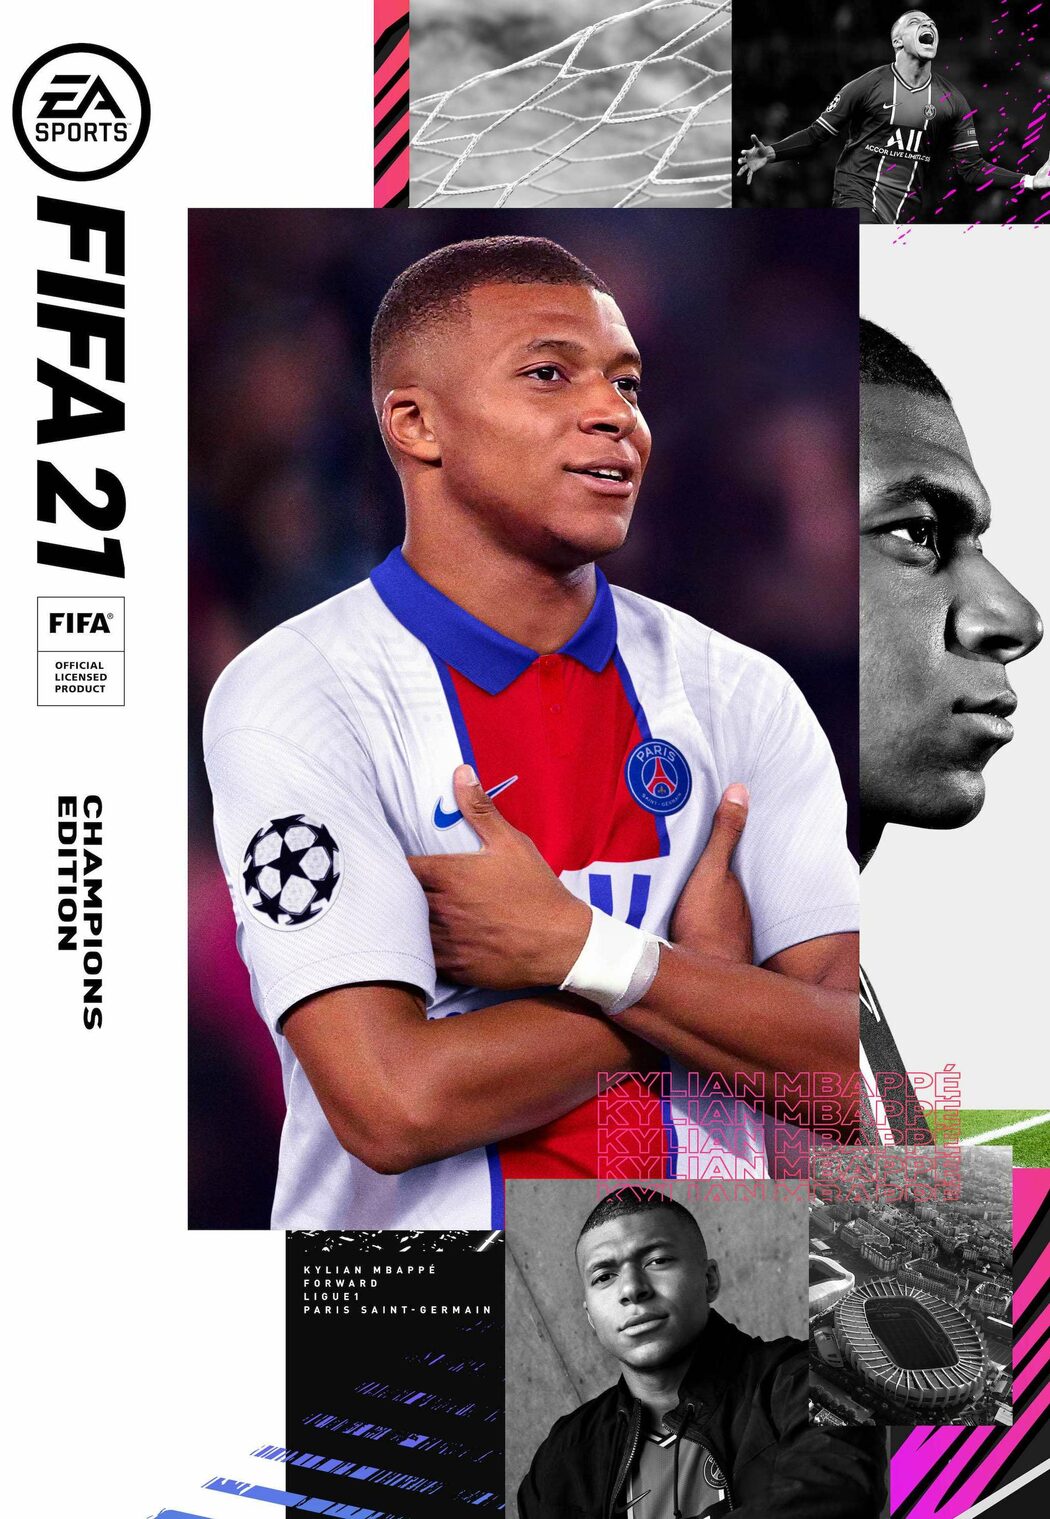 FIFA 21 Champions Edition CD Key for Xbox One (Digital Download)